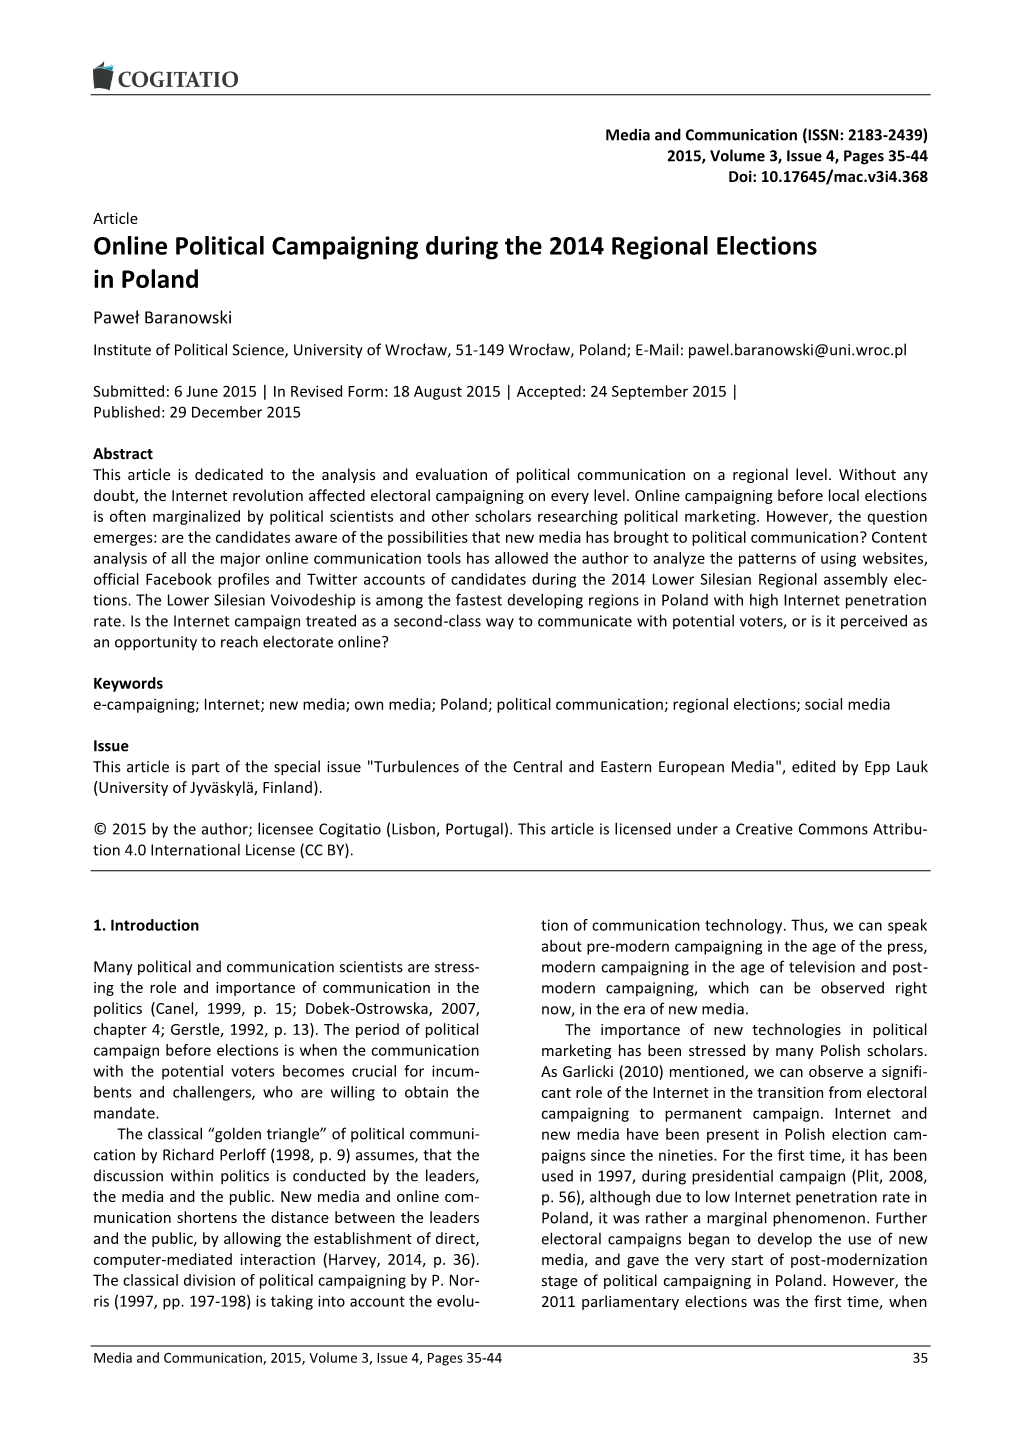 Online Political Campaigning During the 2014 Regional Elections In